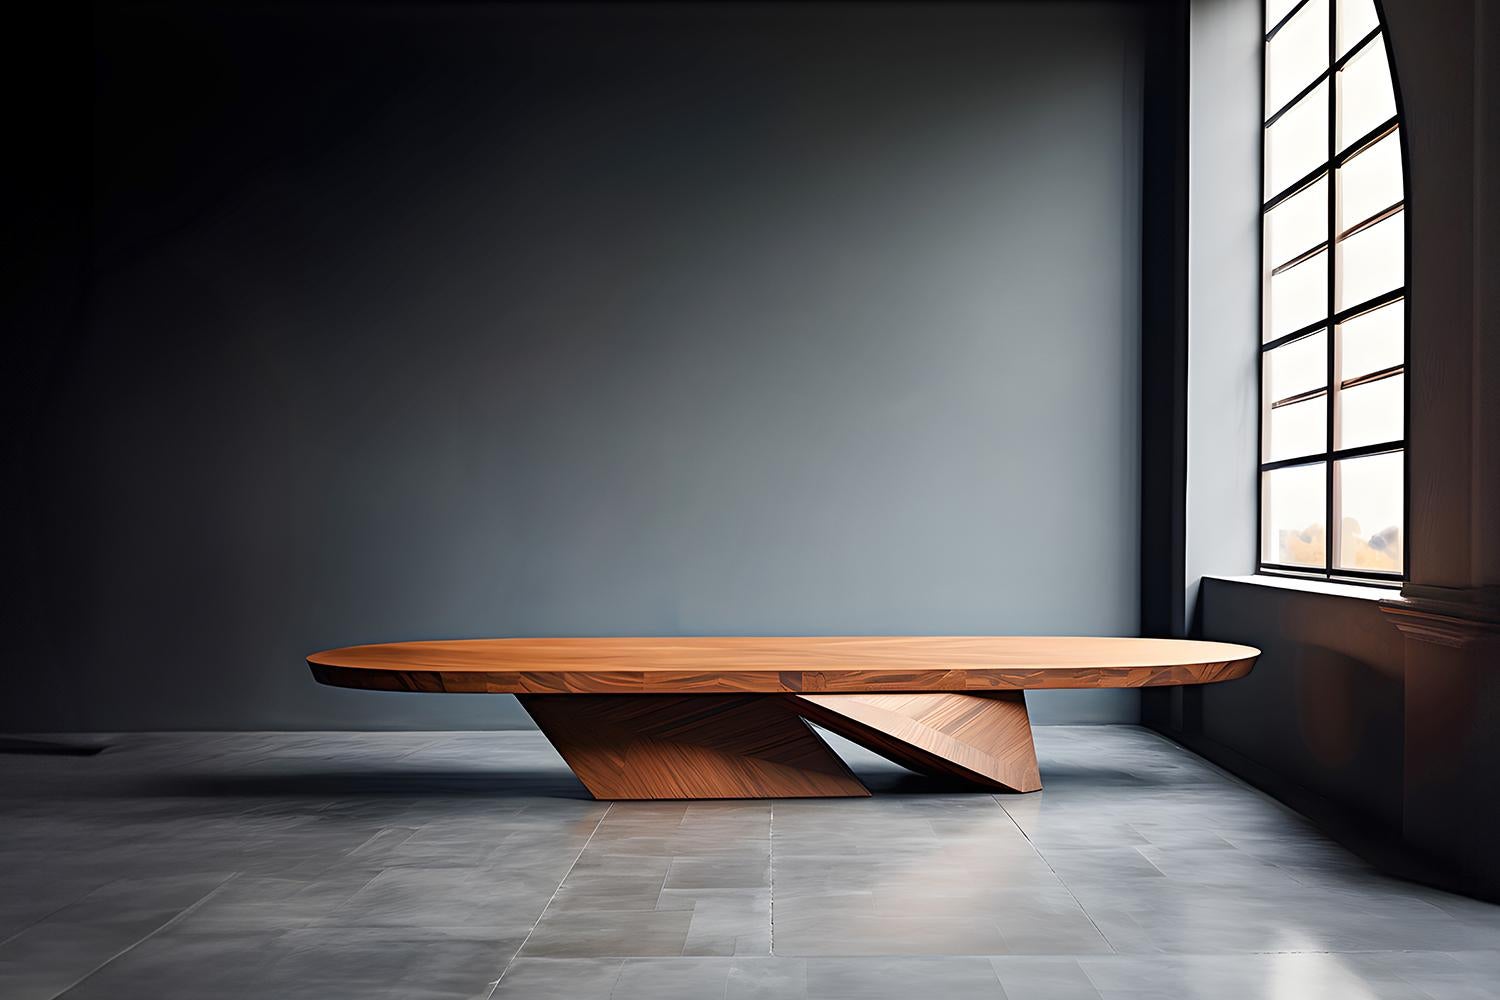 Oval Coffee Table Made of Solid Wood, Center Table Solace S16 by Joel Escalona


The Solace table series, designed by Joel Escalona, is a furniture collection that exudes balance and presence, thanks to its sensuous, dense, and irregular shapes.